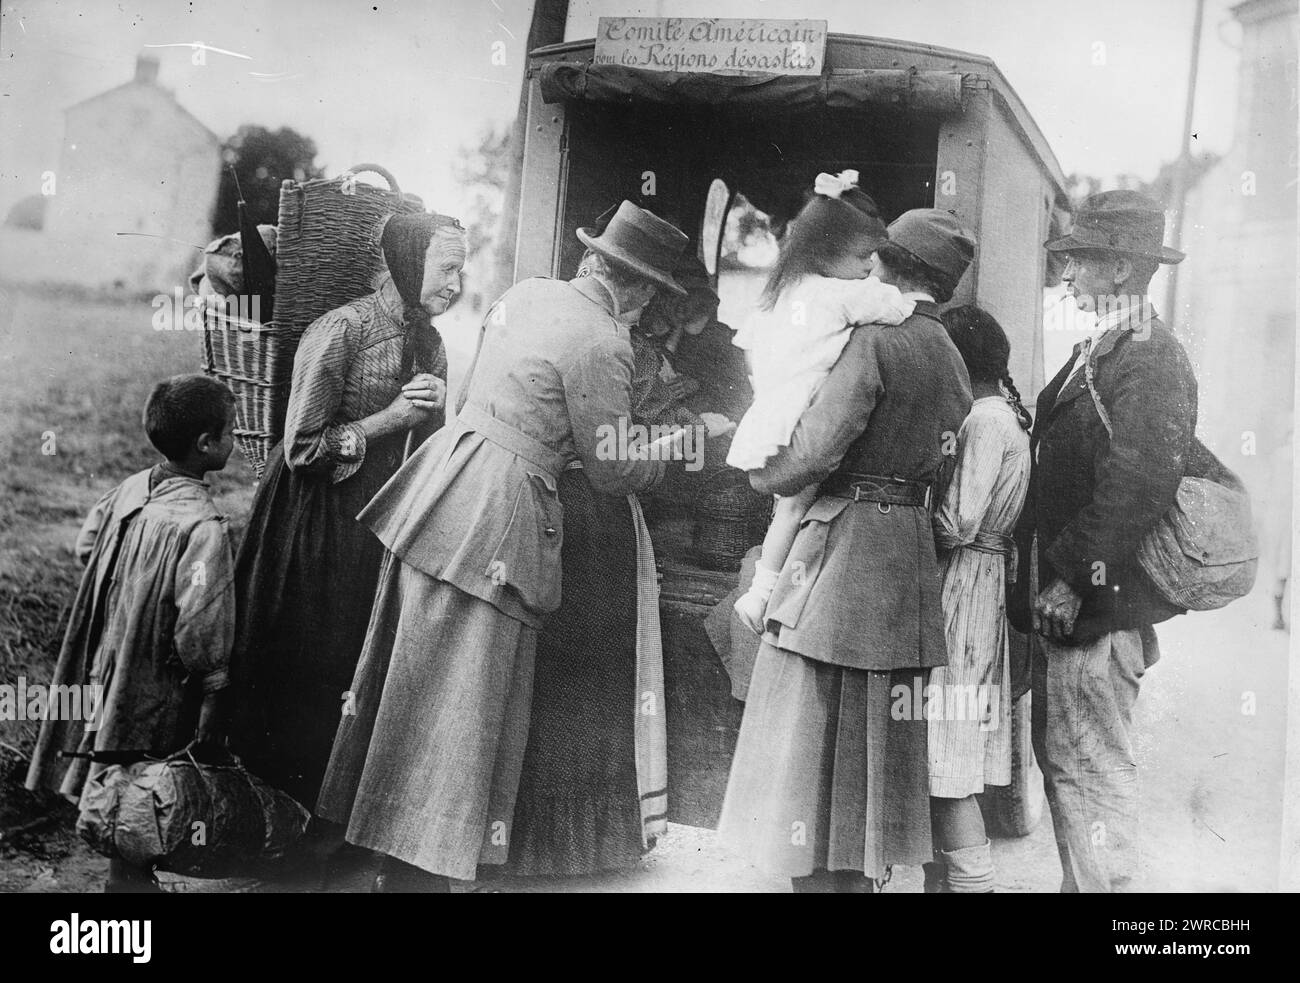 Caring for Refugees, Photograph shows the World War I relief efforts of the 'Comité Americain pour les Régions Dévastées de France' (American Committee for Devastated France)., between 1919 and 1924, World War, 1914-1918, Glass negatives, 1 negative: glass Stock Photo